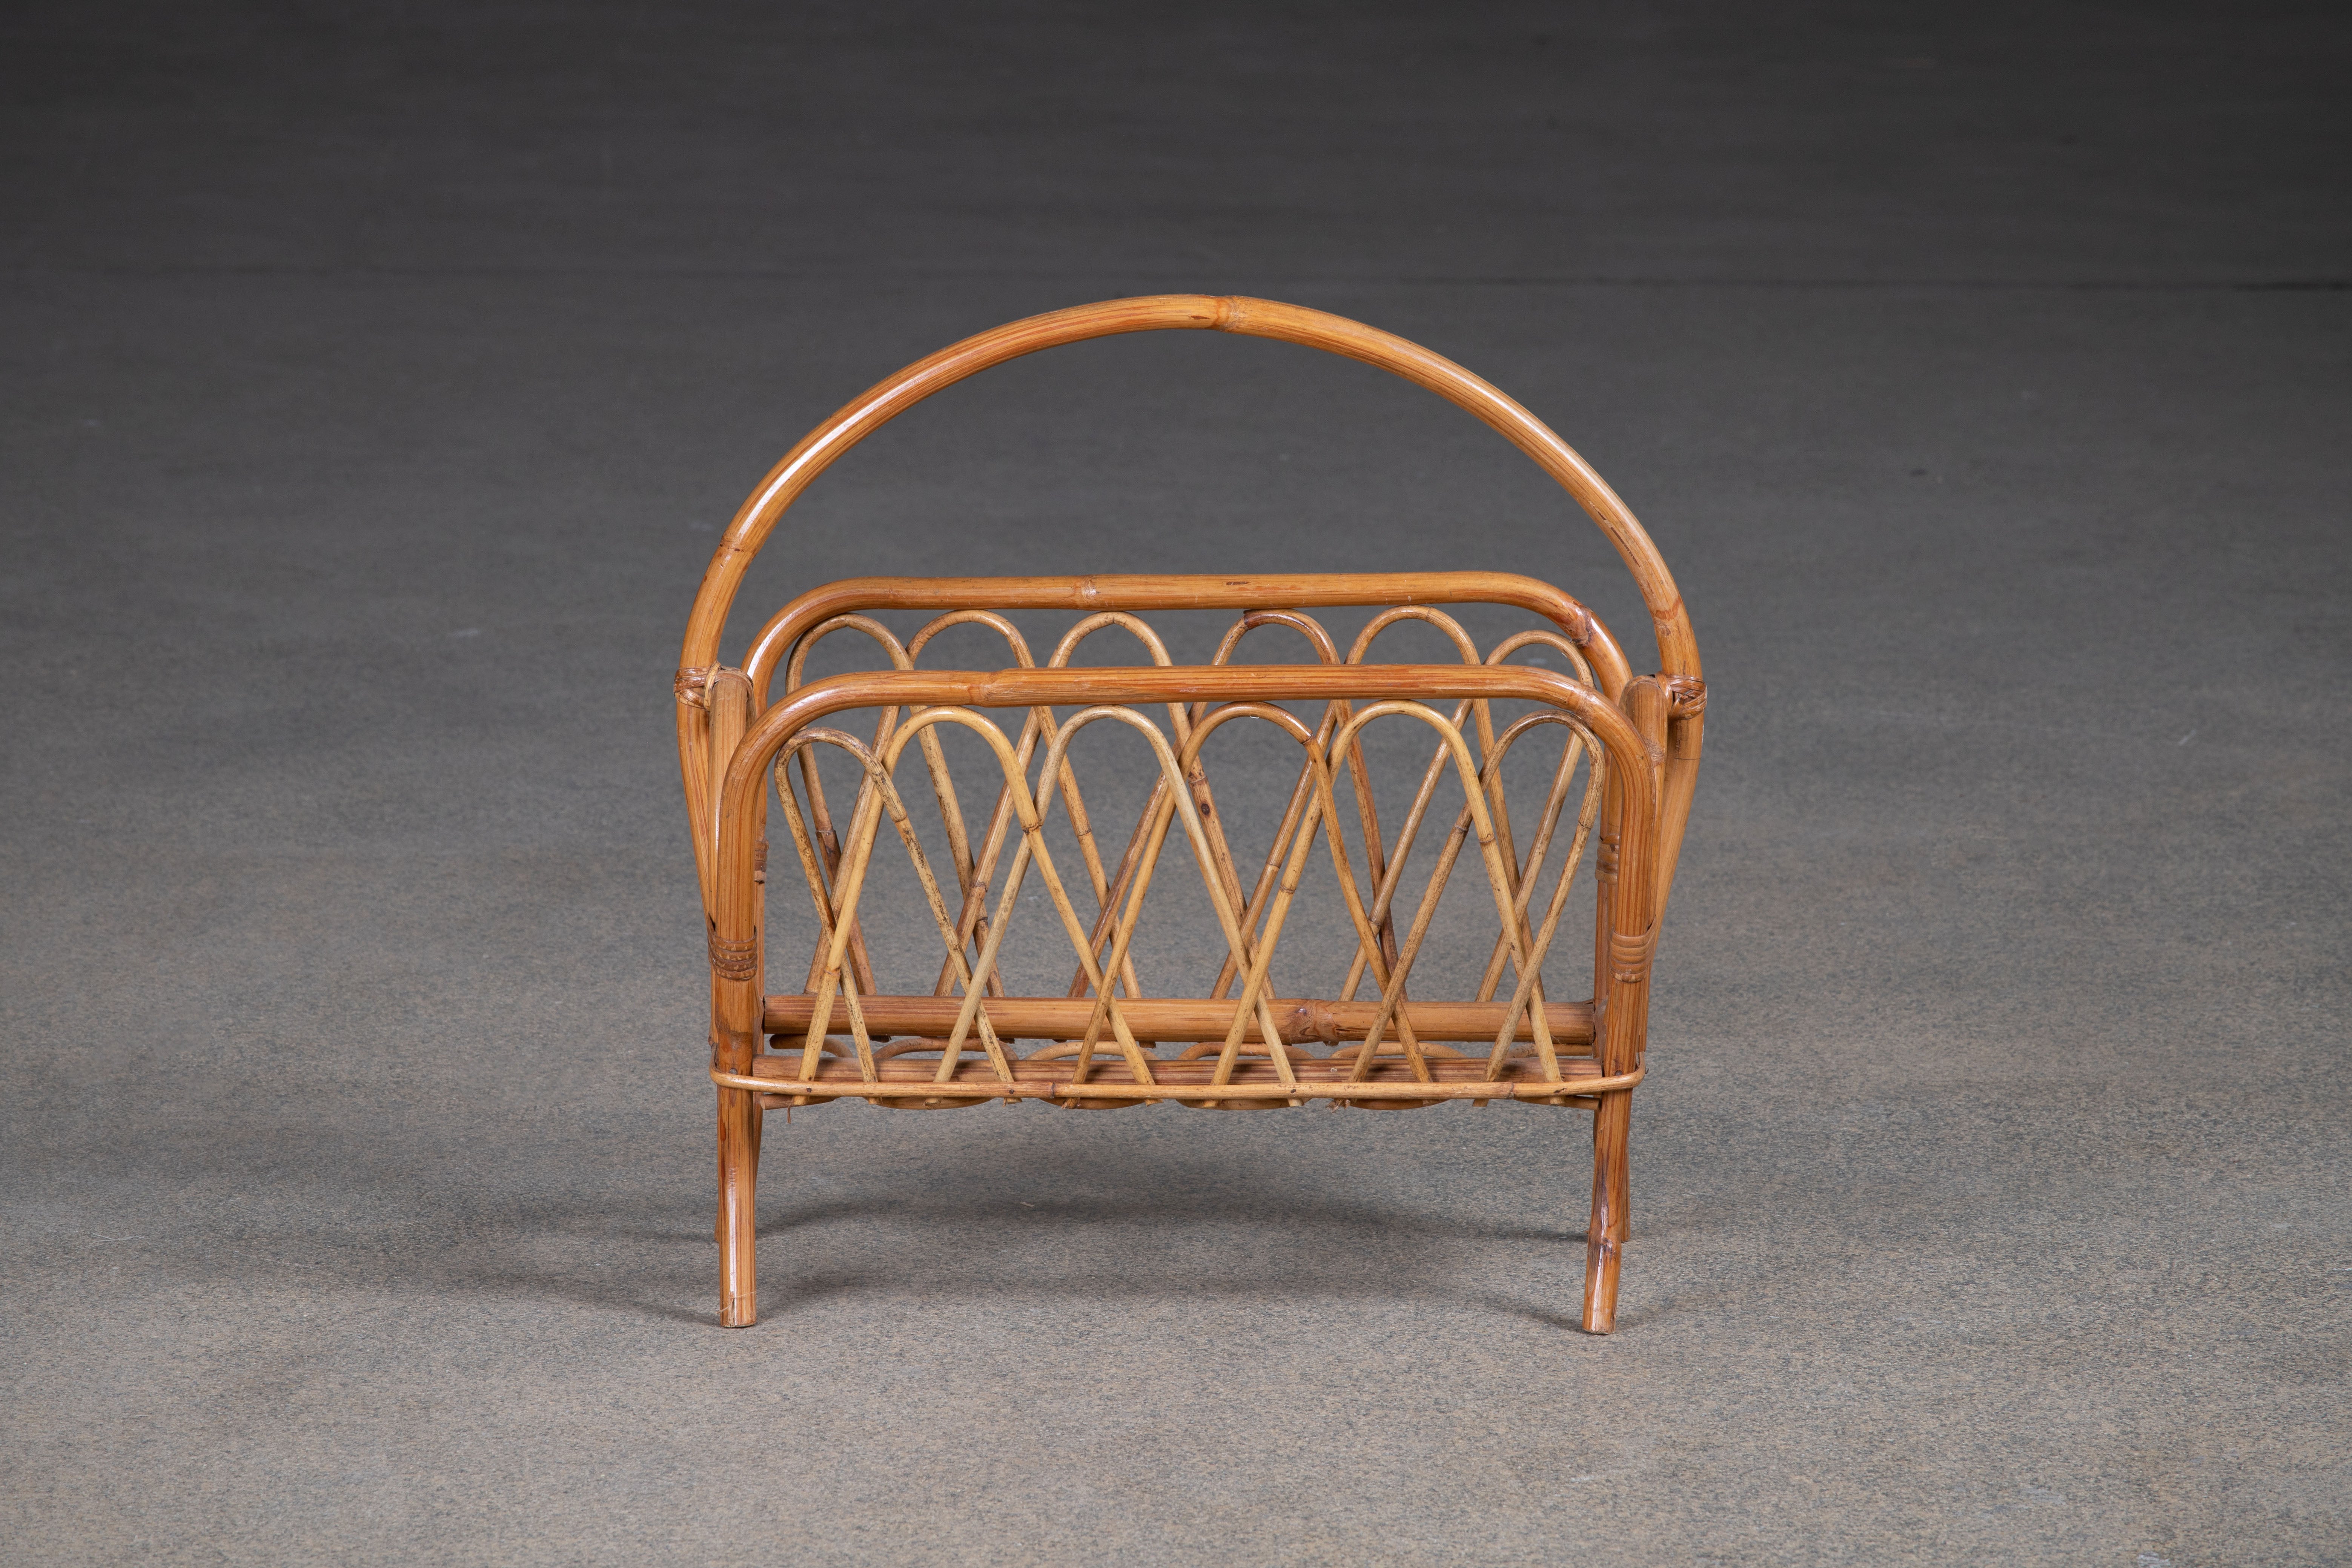 A lovely magazine rack made of high quality rattan in the style of Franco Albini, manufactured in Italy around 1950. This elegant piece has very nicely curved shapes, nicely integrated into a practical and stylish magazine holder! It remains in